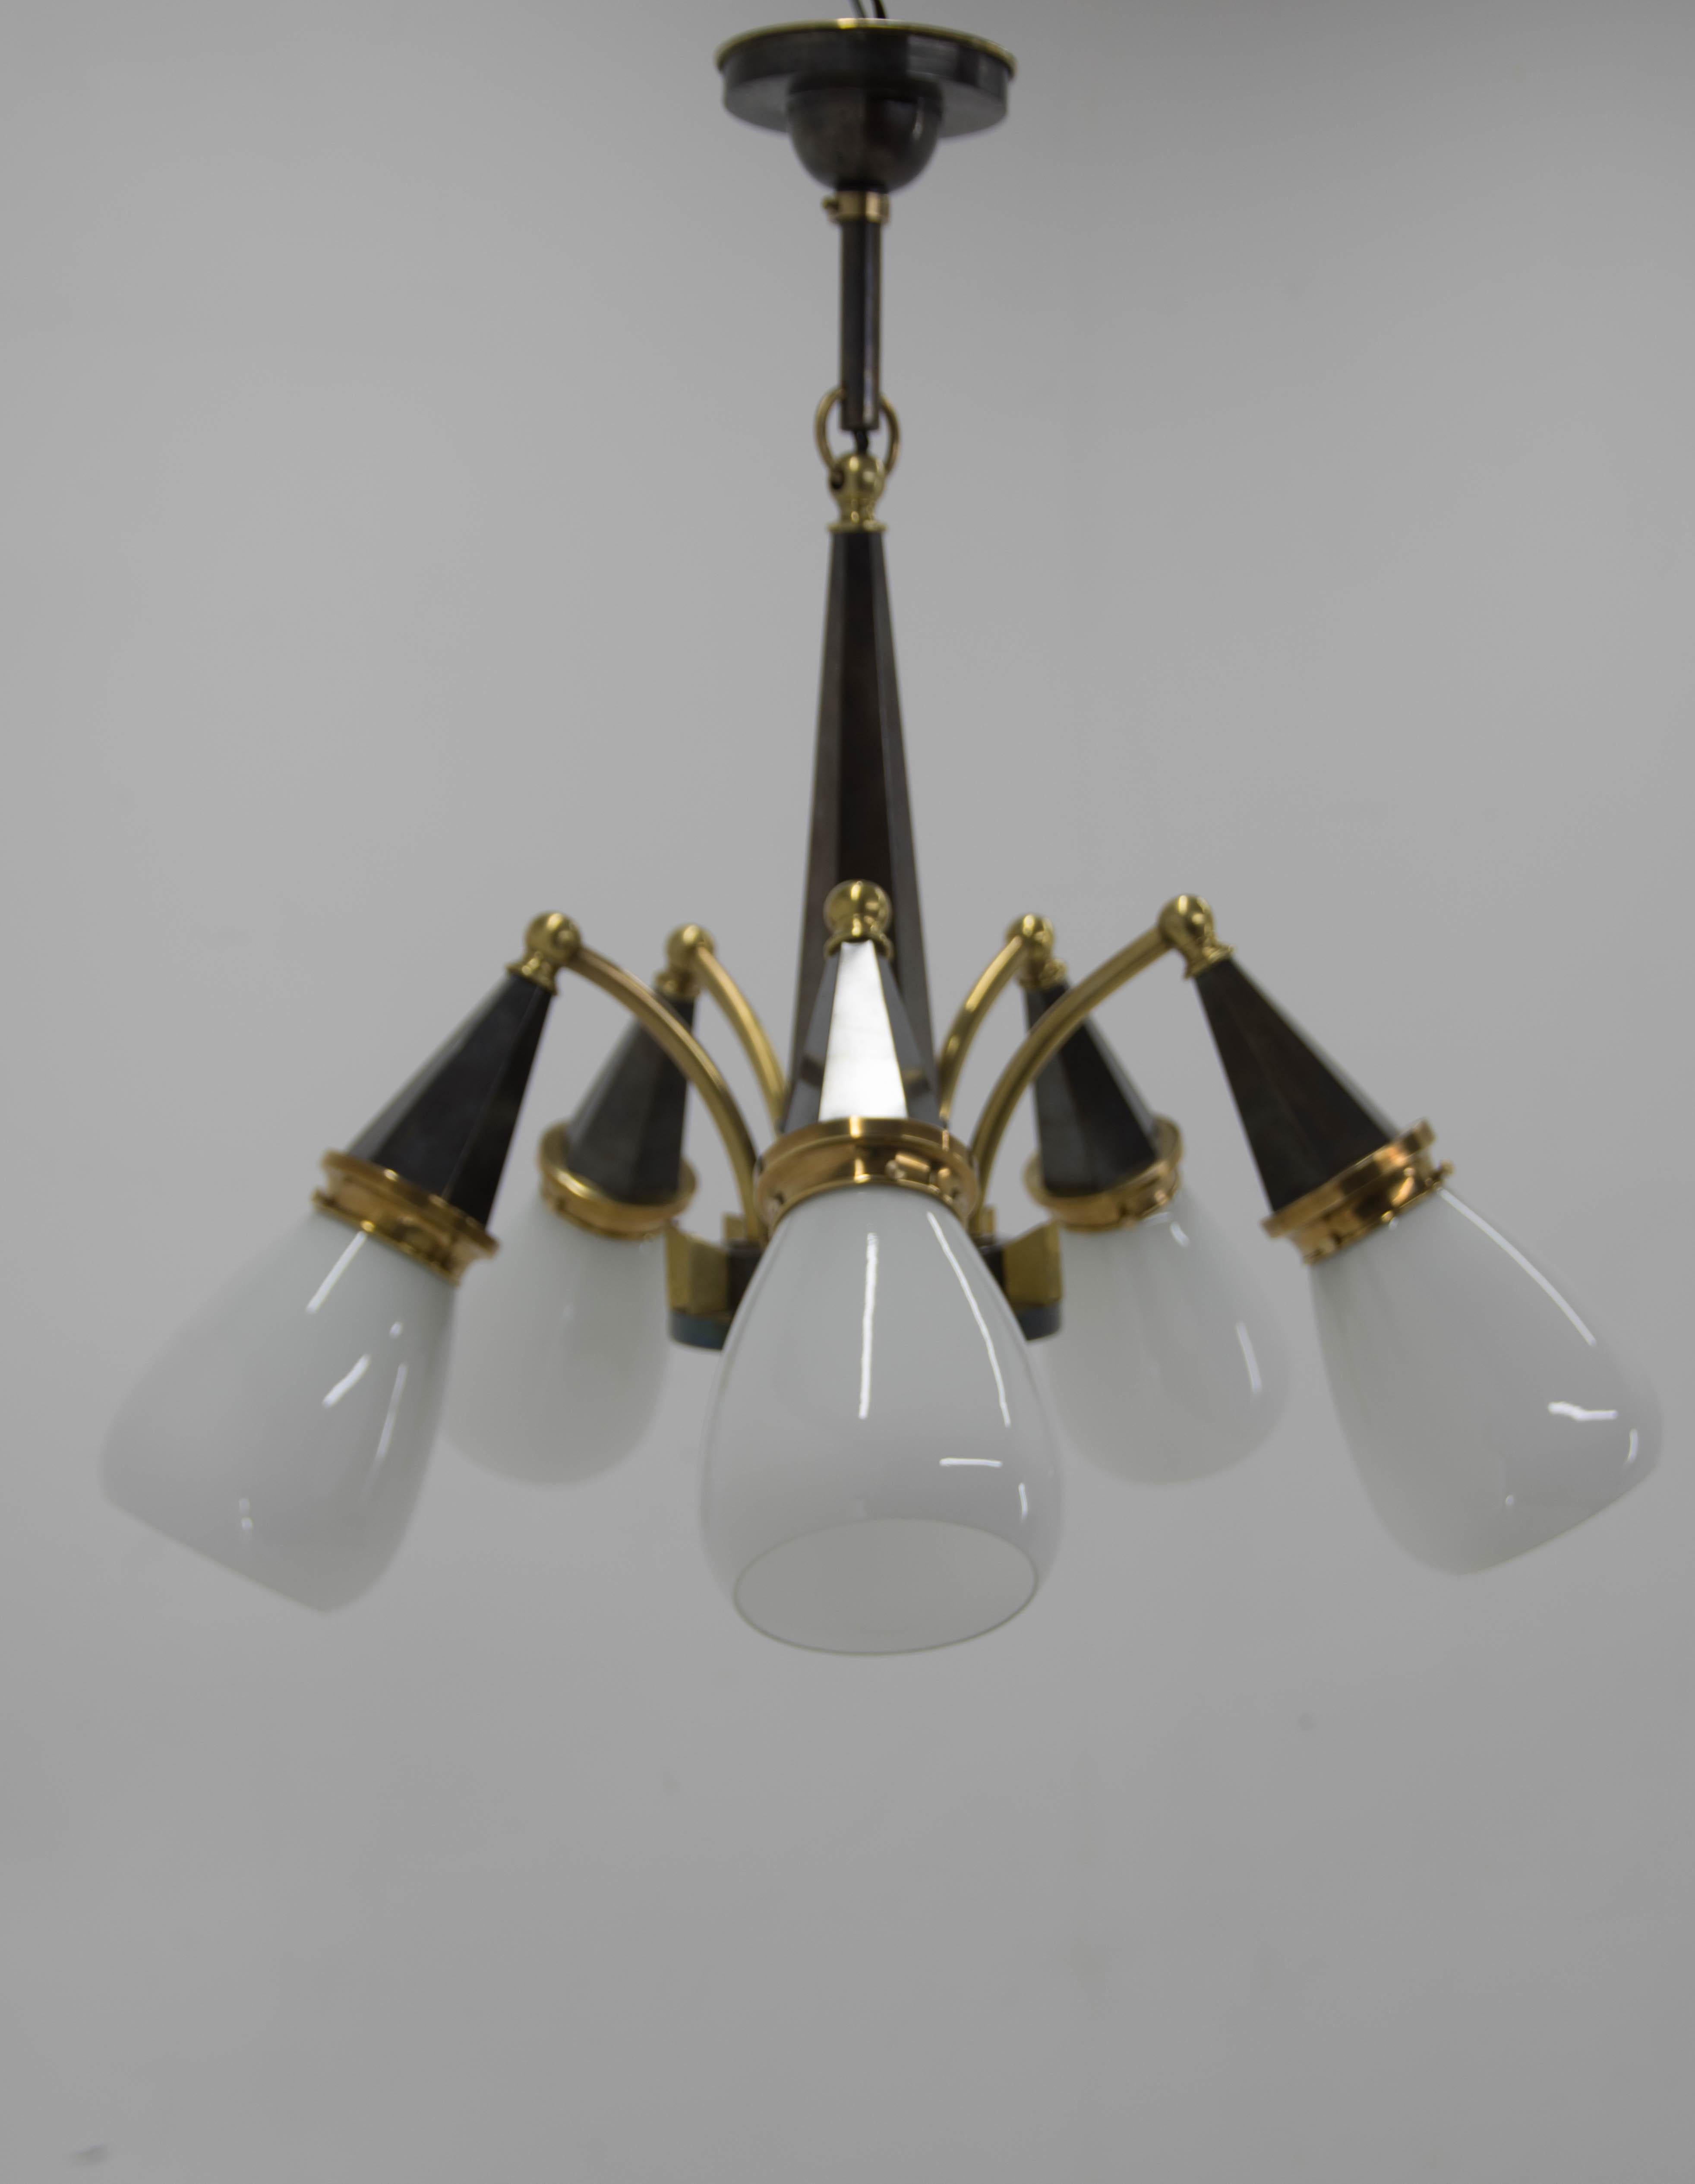 5-flamming brass chandelier in Cubist style.
Professionally restored: polished, rewired.
Opaline glass in perfect condition.
5x40W, E25-E27 bulbs
US wiring compatible.